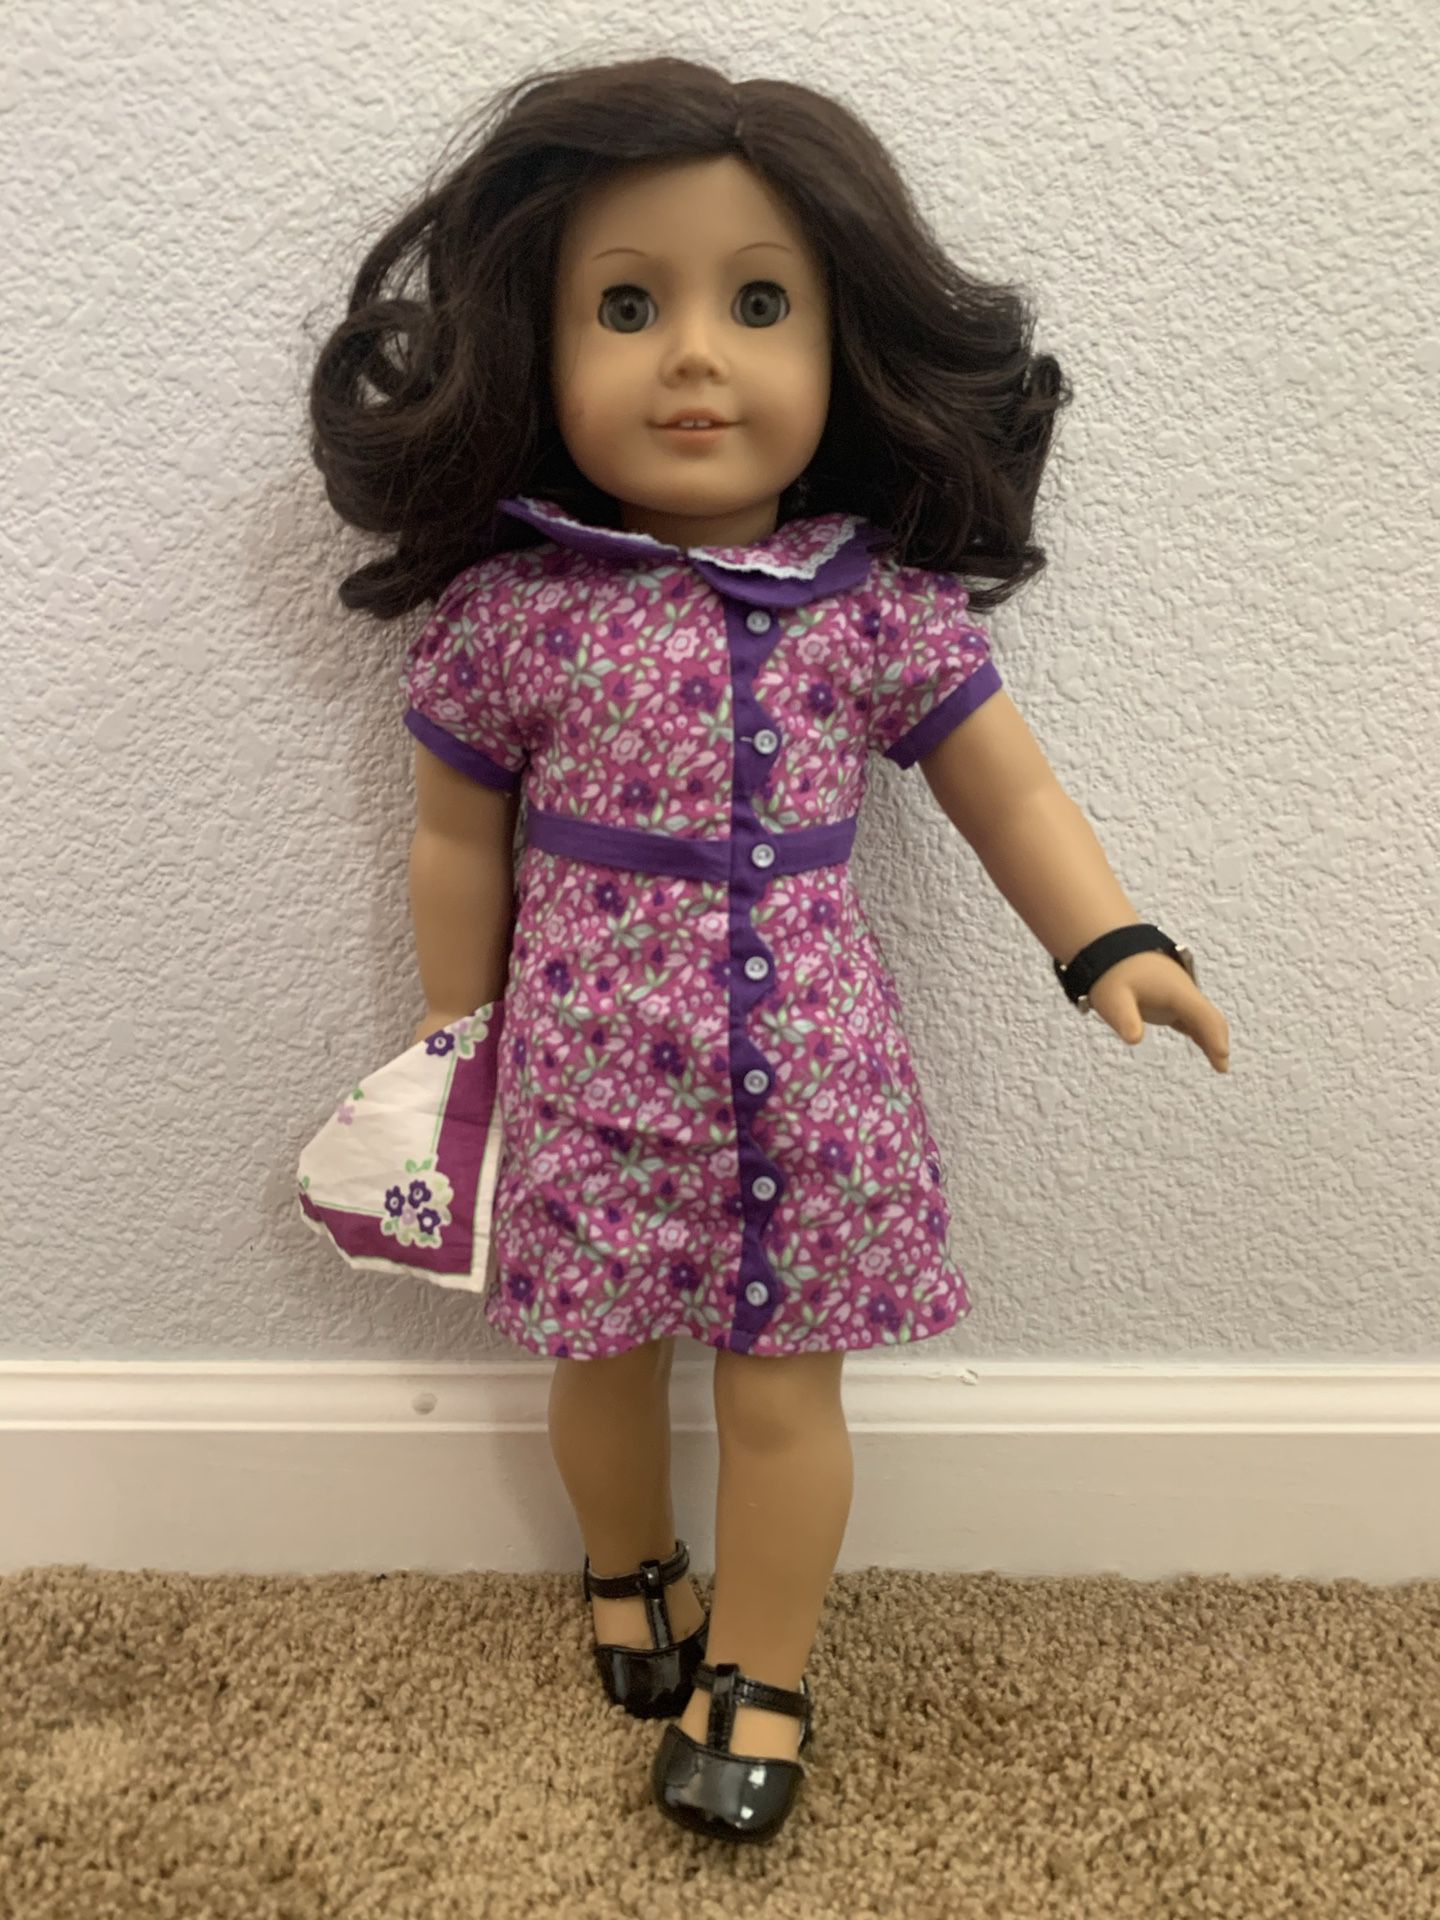 Ruthie Smithens a historical American Girl doll